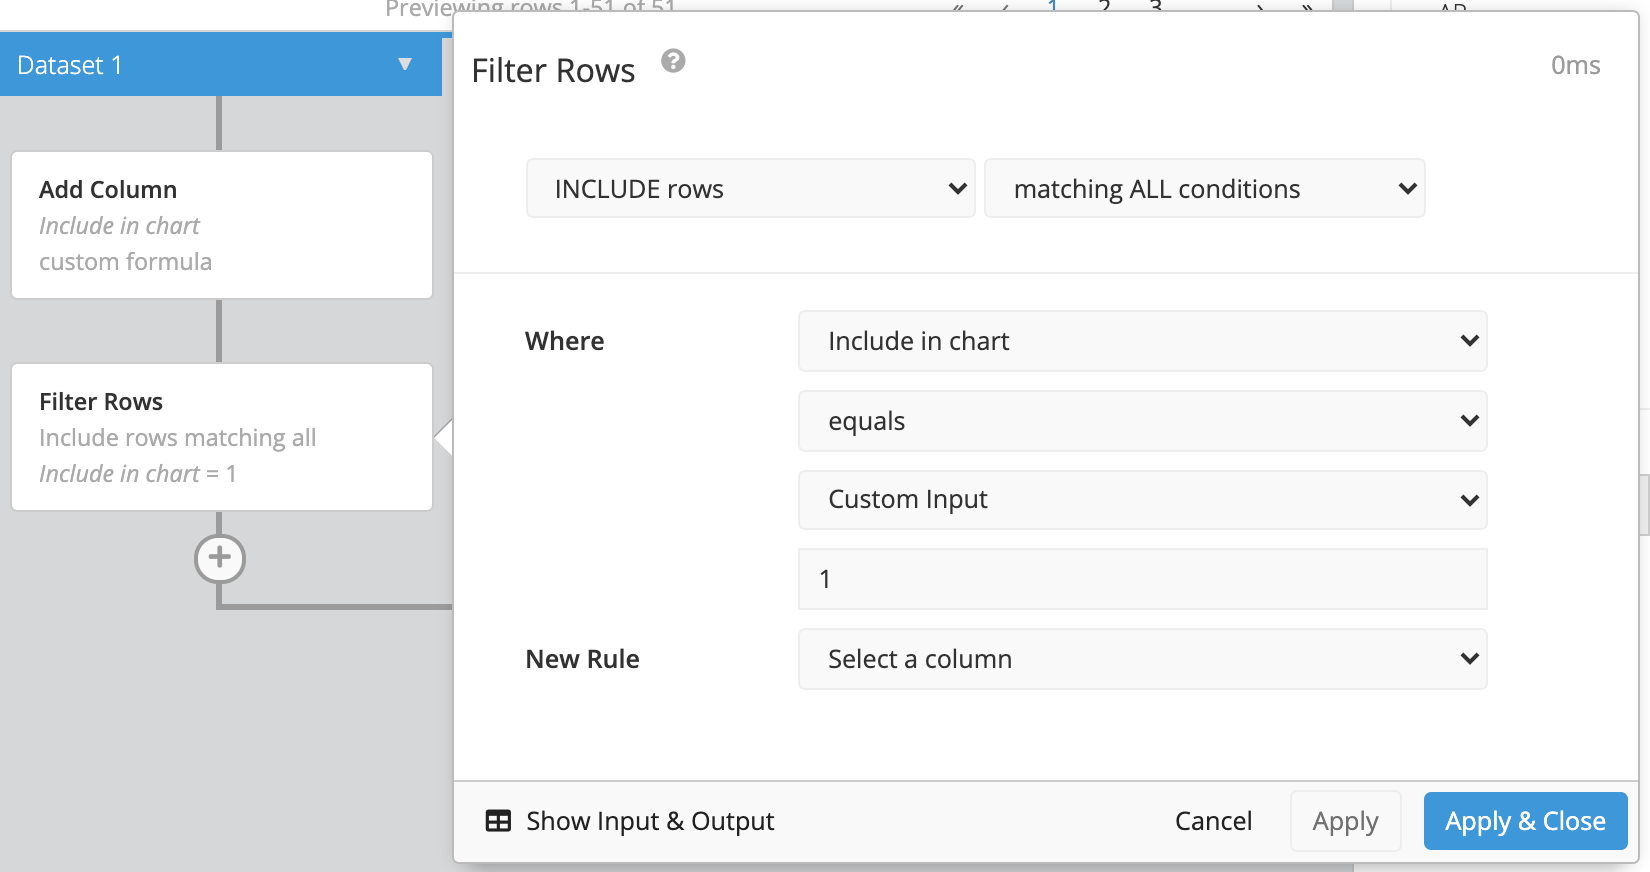 Filtering rows in Chartio